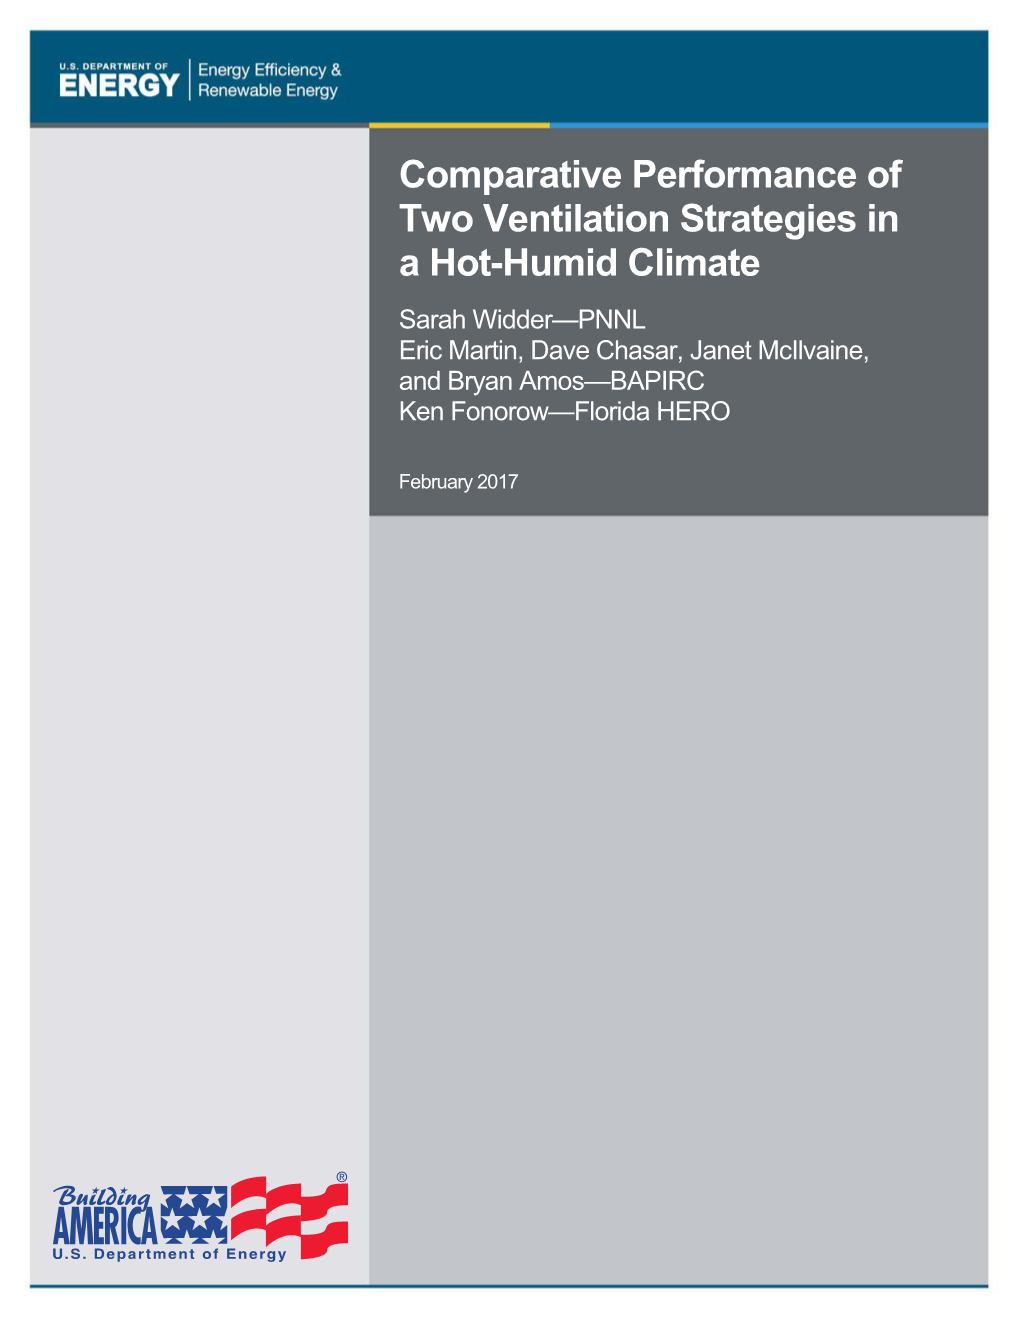 Comparative Performance of Two Ventilation Strategies in a Hot-Humid Climate